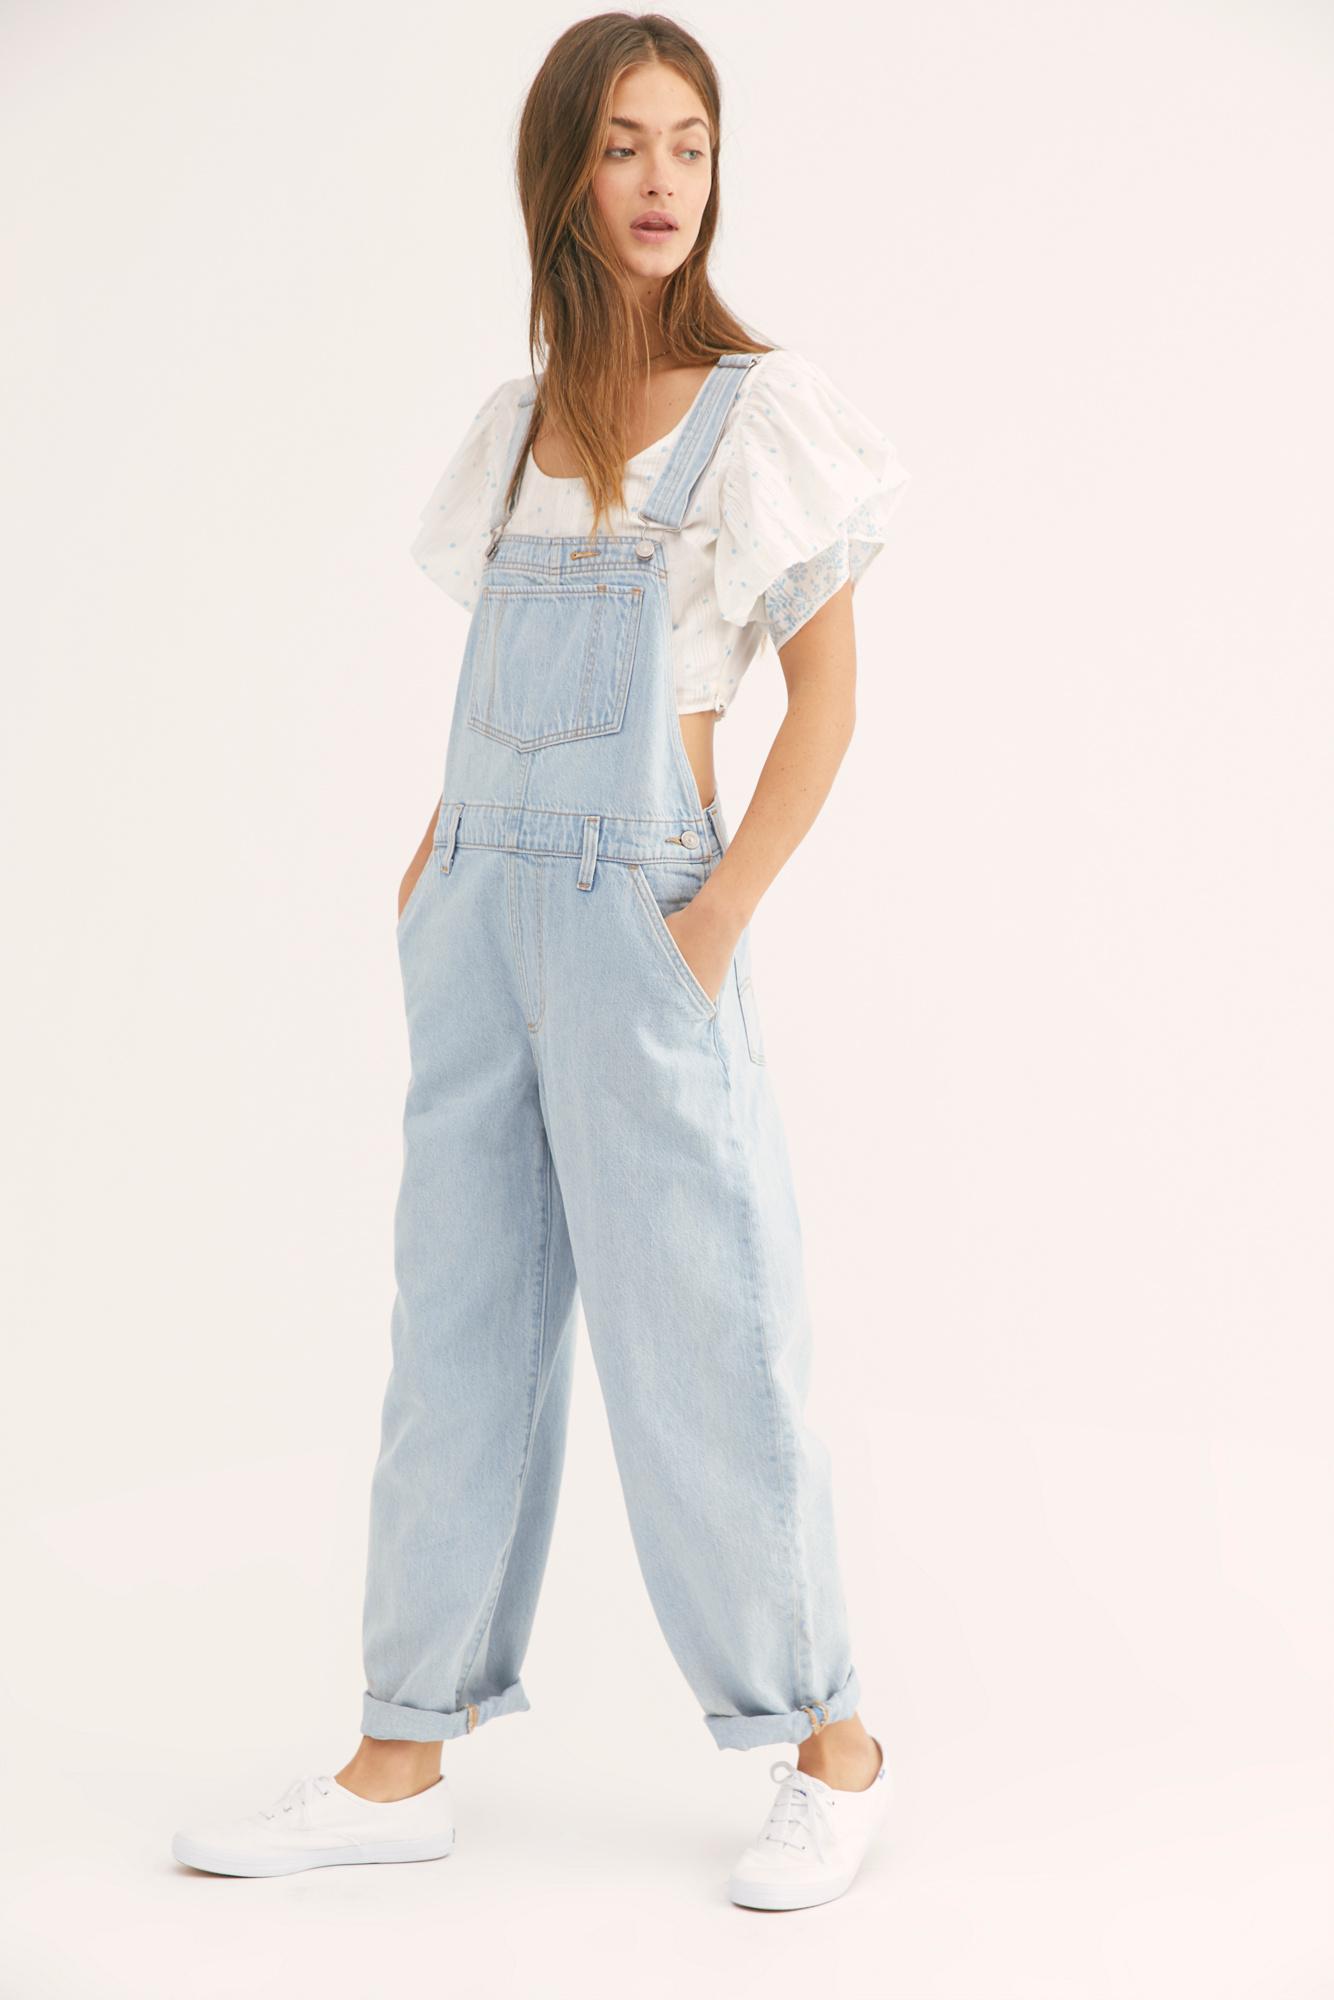 Free People Levi's Baggy Denim Overalls in Blue - Lyst